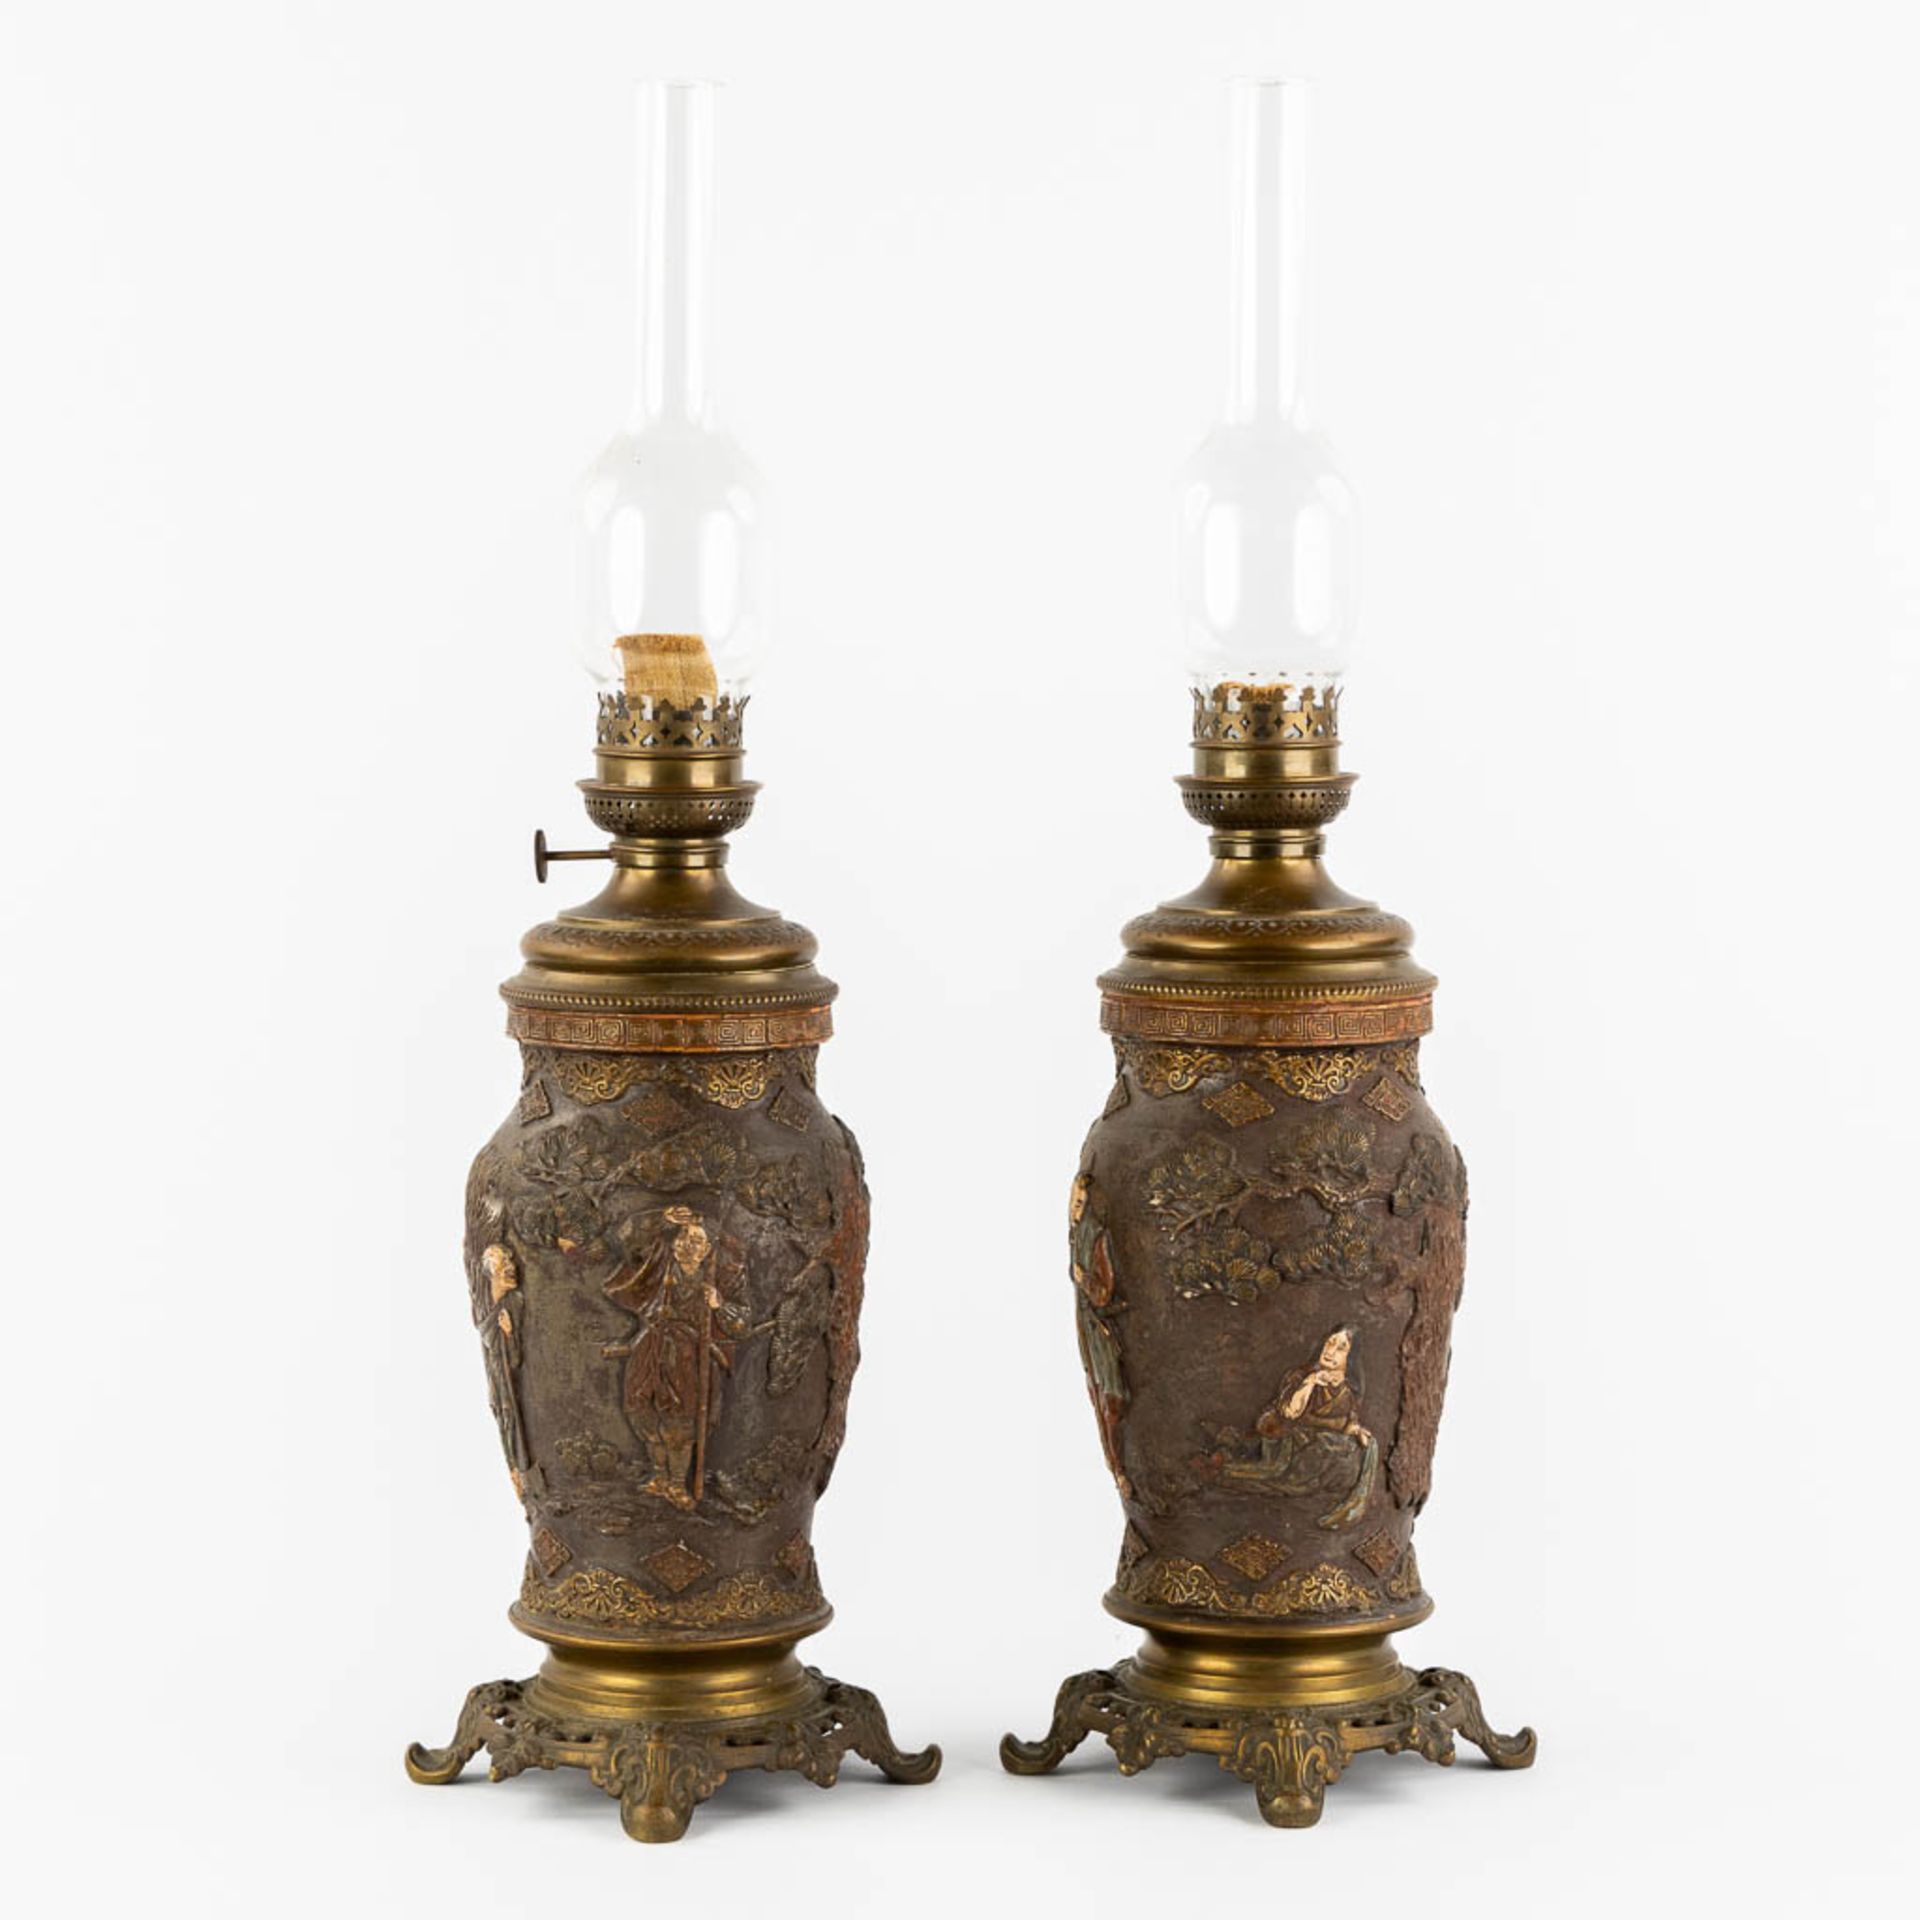 An Oriental pair of oil lamps, terracotta mounted with bronze. Circa 1900. (H:66 x D:18 cm) - Image 8 of 17